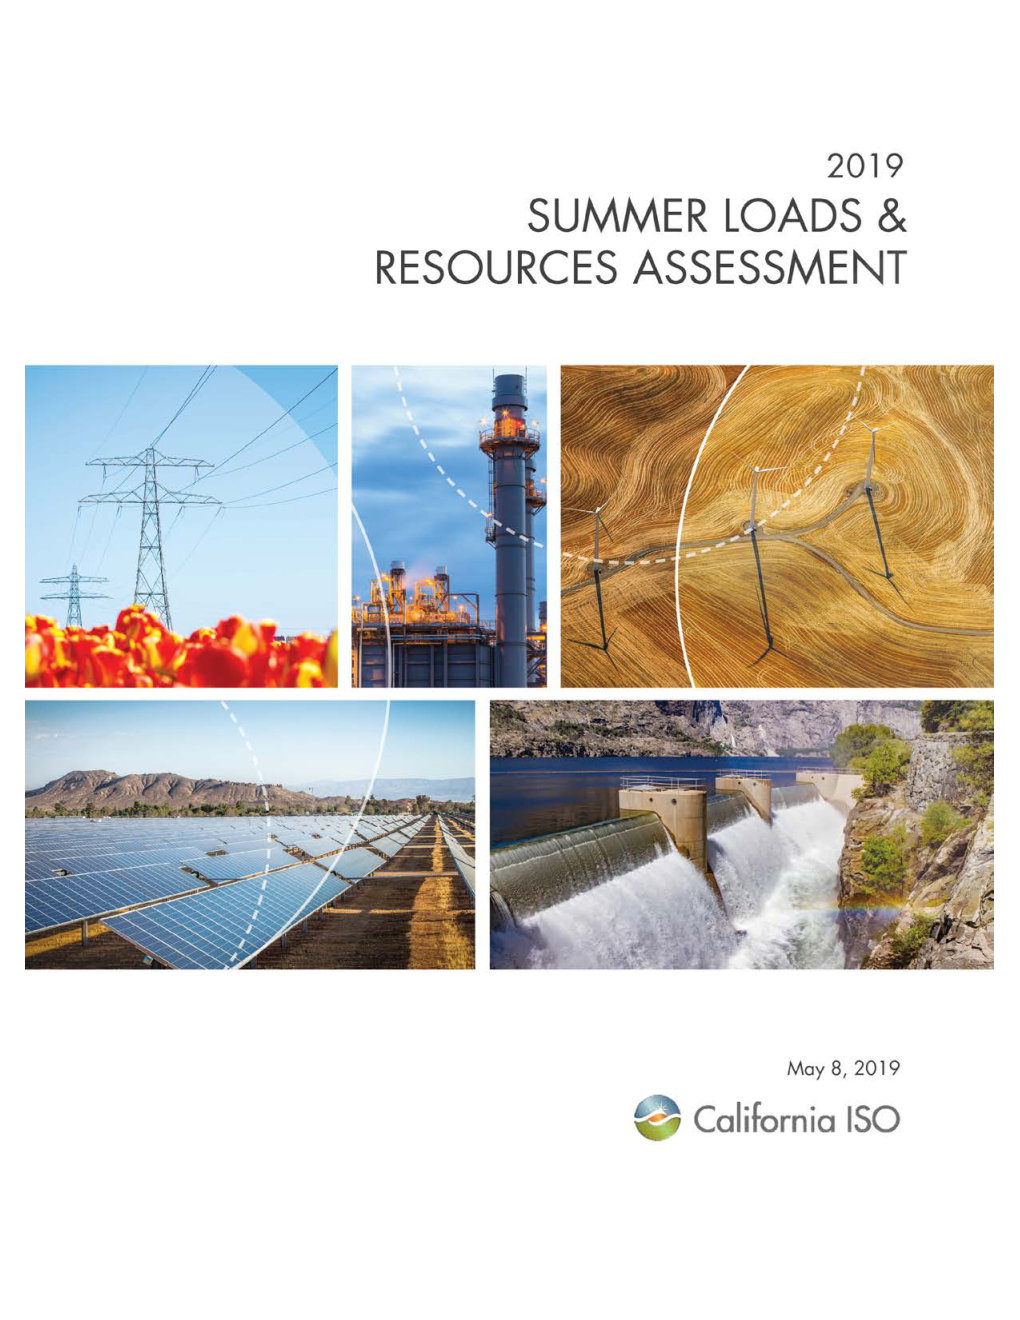 Briefing on 2019 Summer Loads and Resources